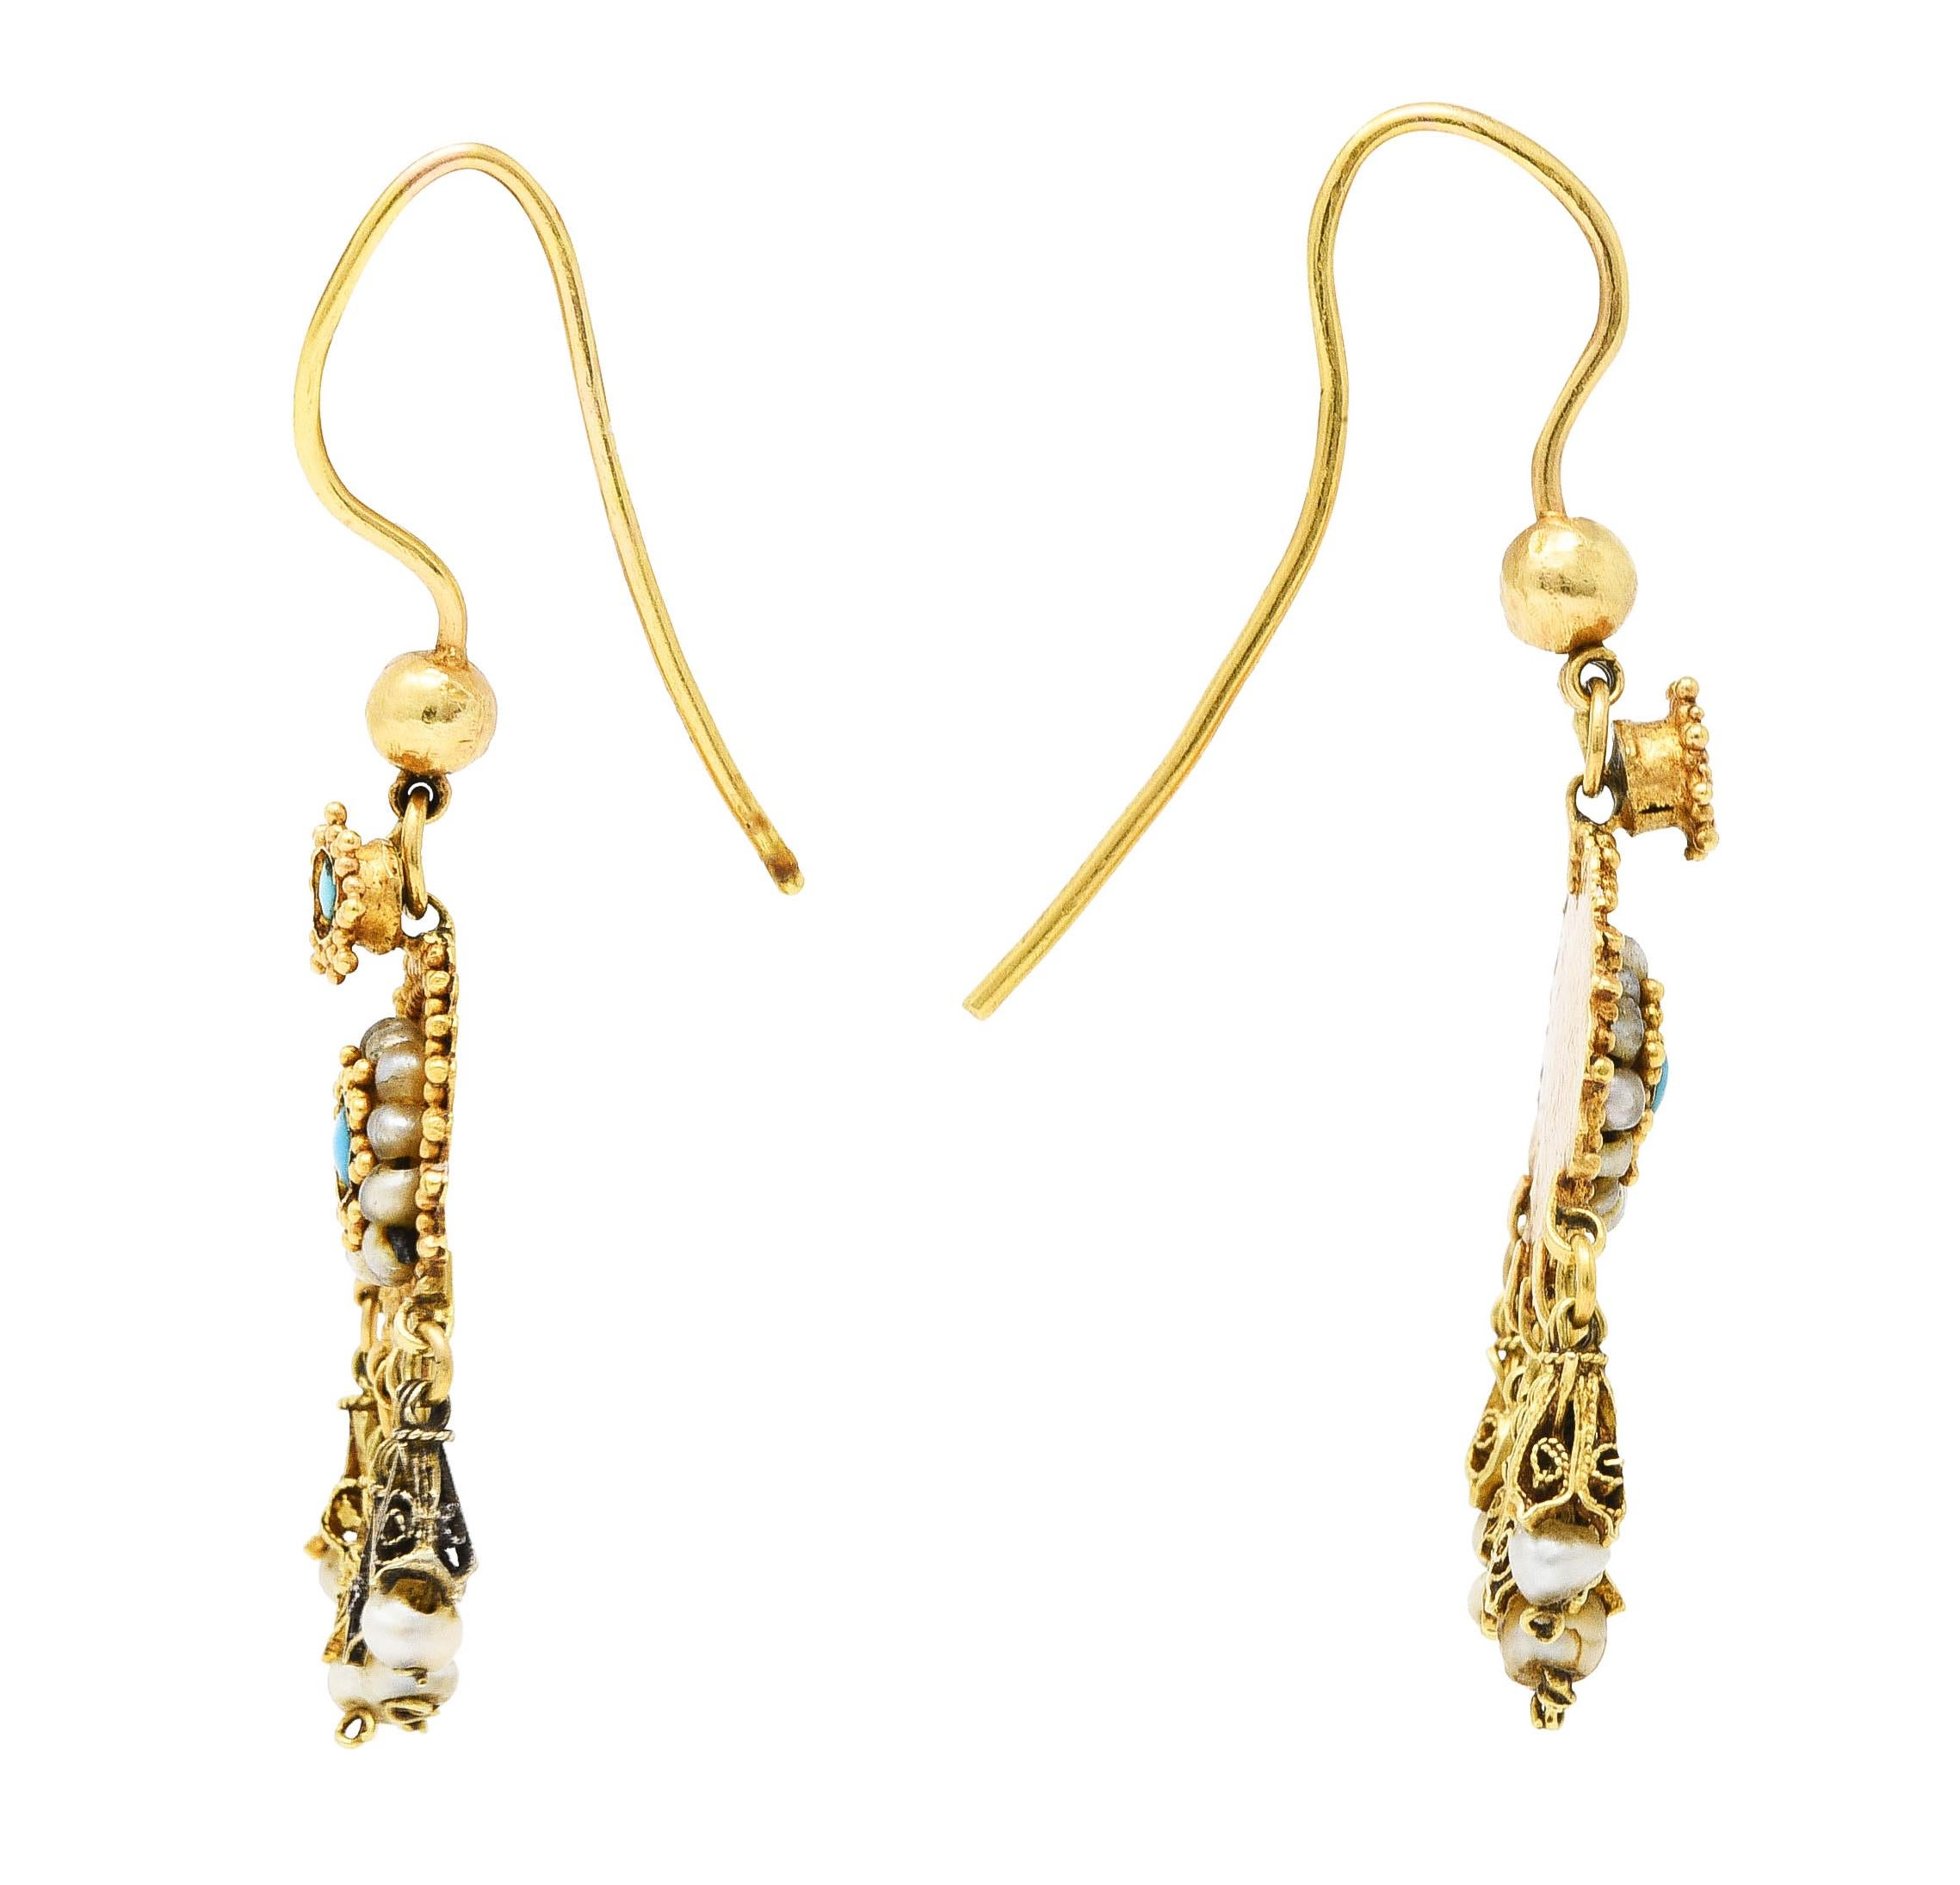 Drop style earrings designed as radial gold bead surmount suspending an ornate circular drop

Drop features a gold bead surround and articulated fringe terminating as seed pearls

Seed pearls range from gray to cream in body color - quality